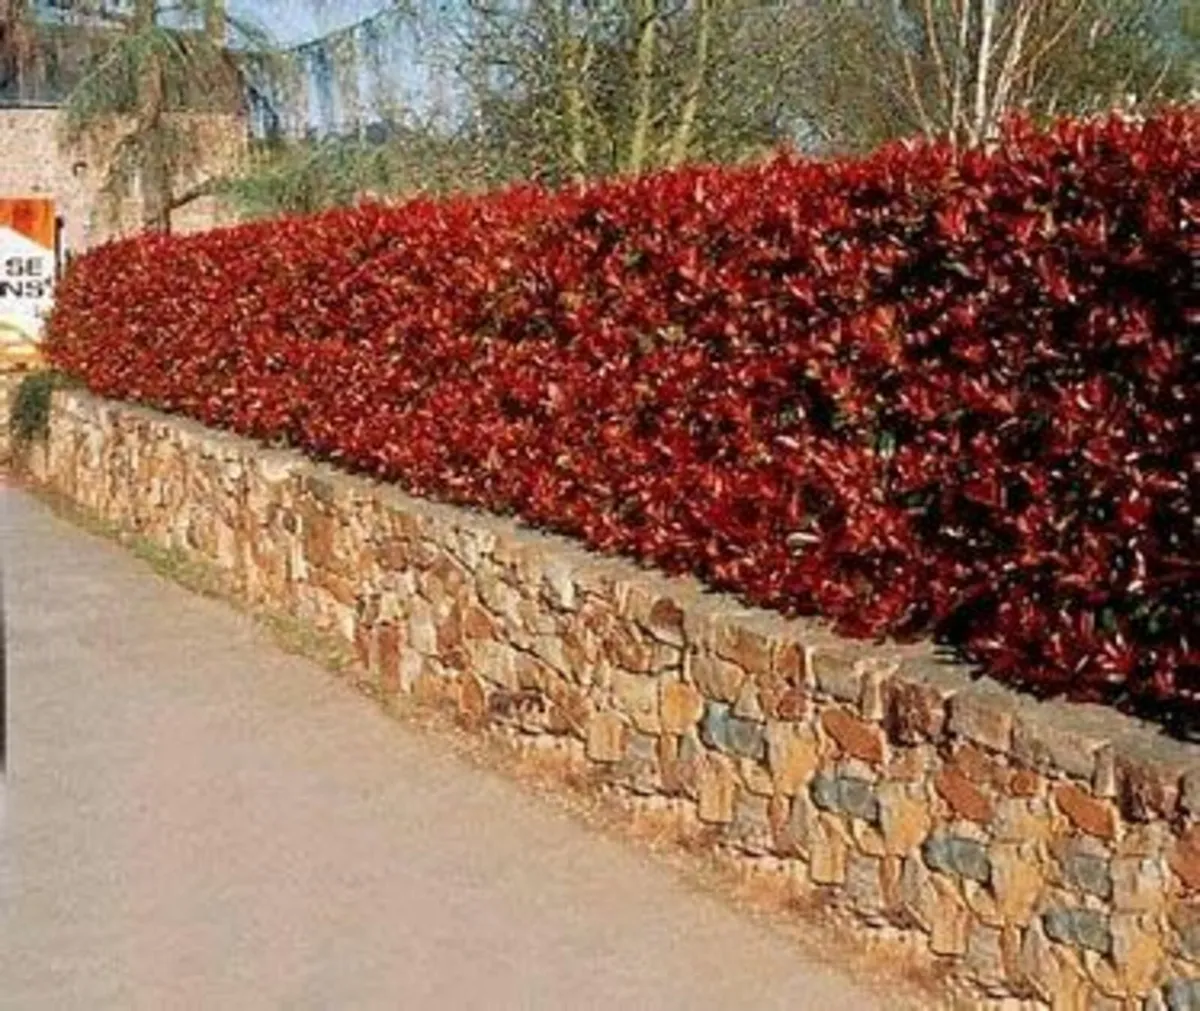 Quality Red Robin Hedging 3ft+  just 6 euro - Image 1